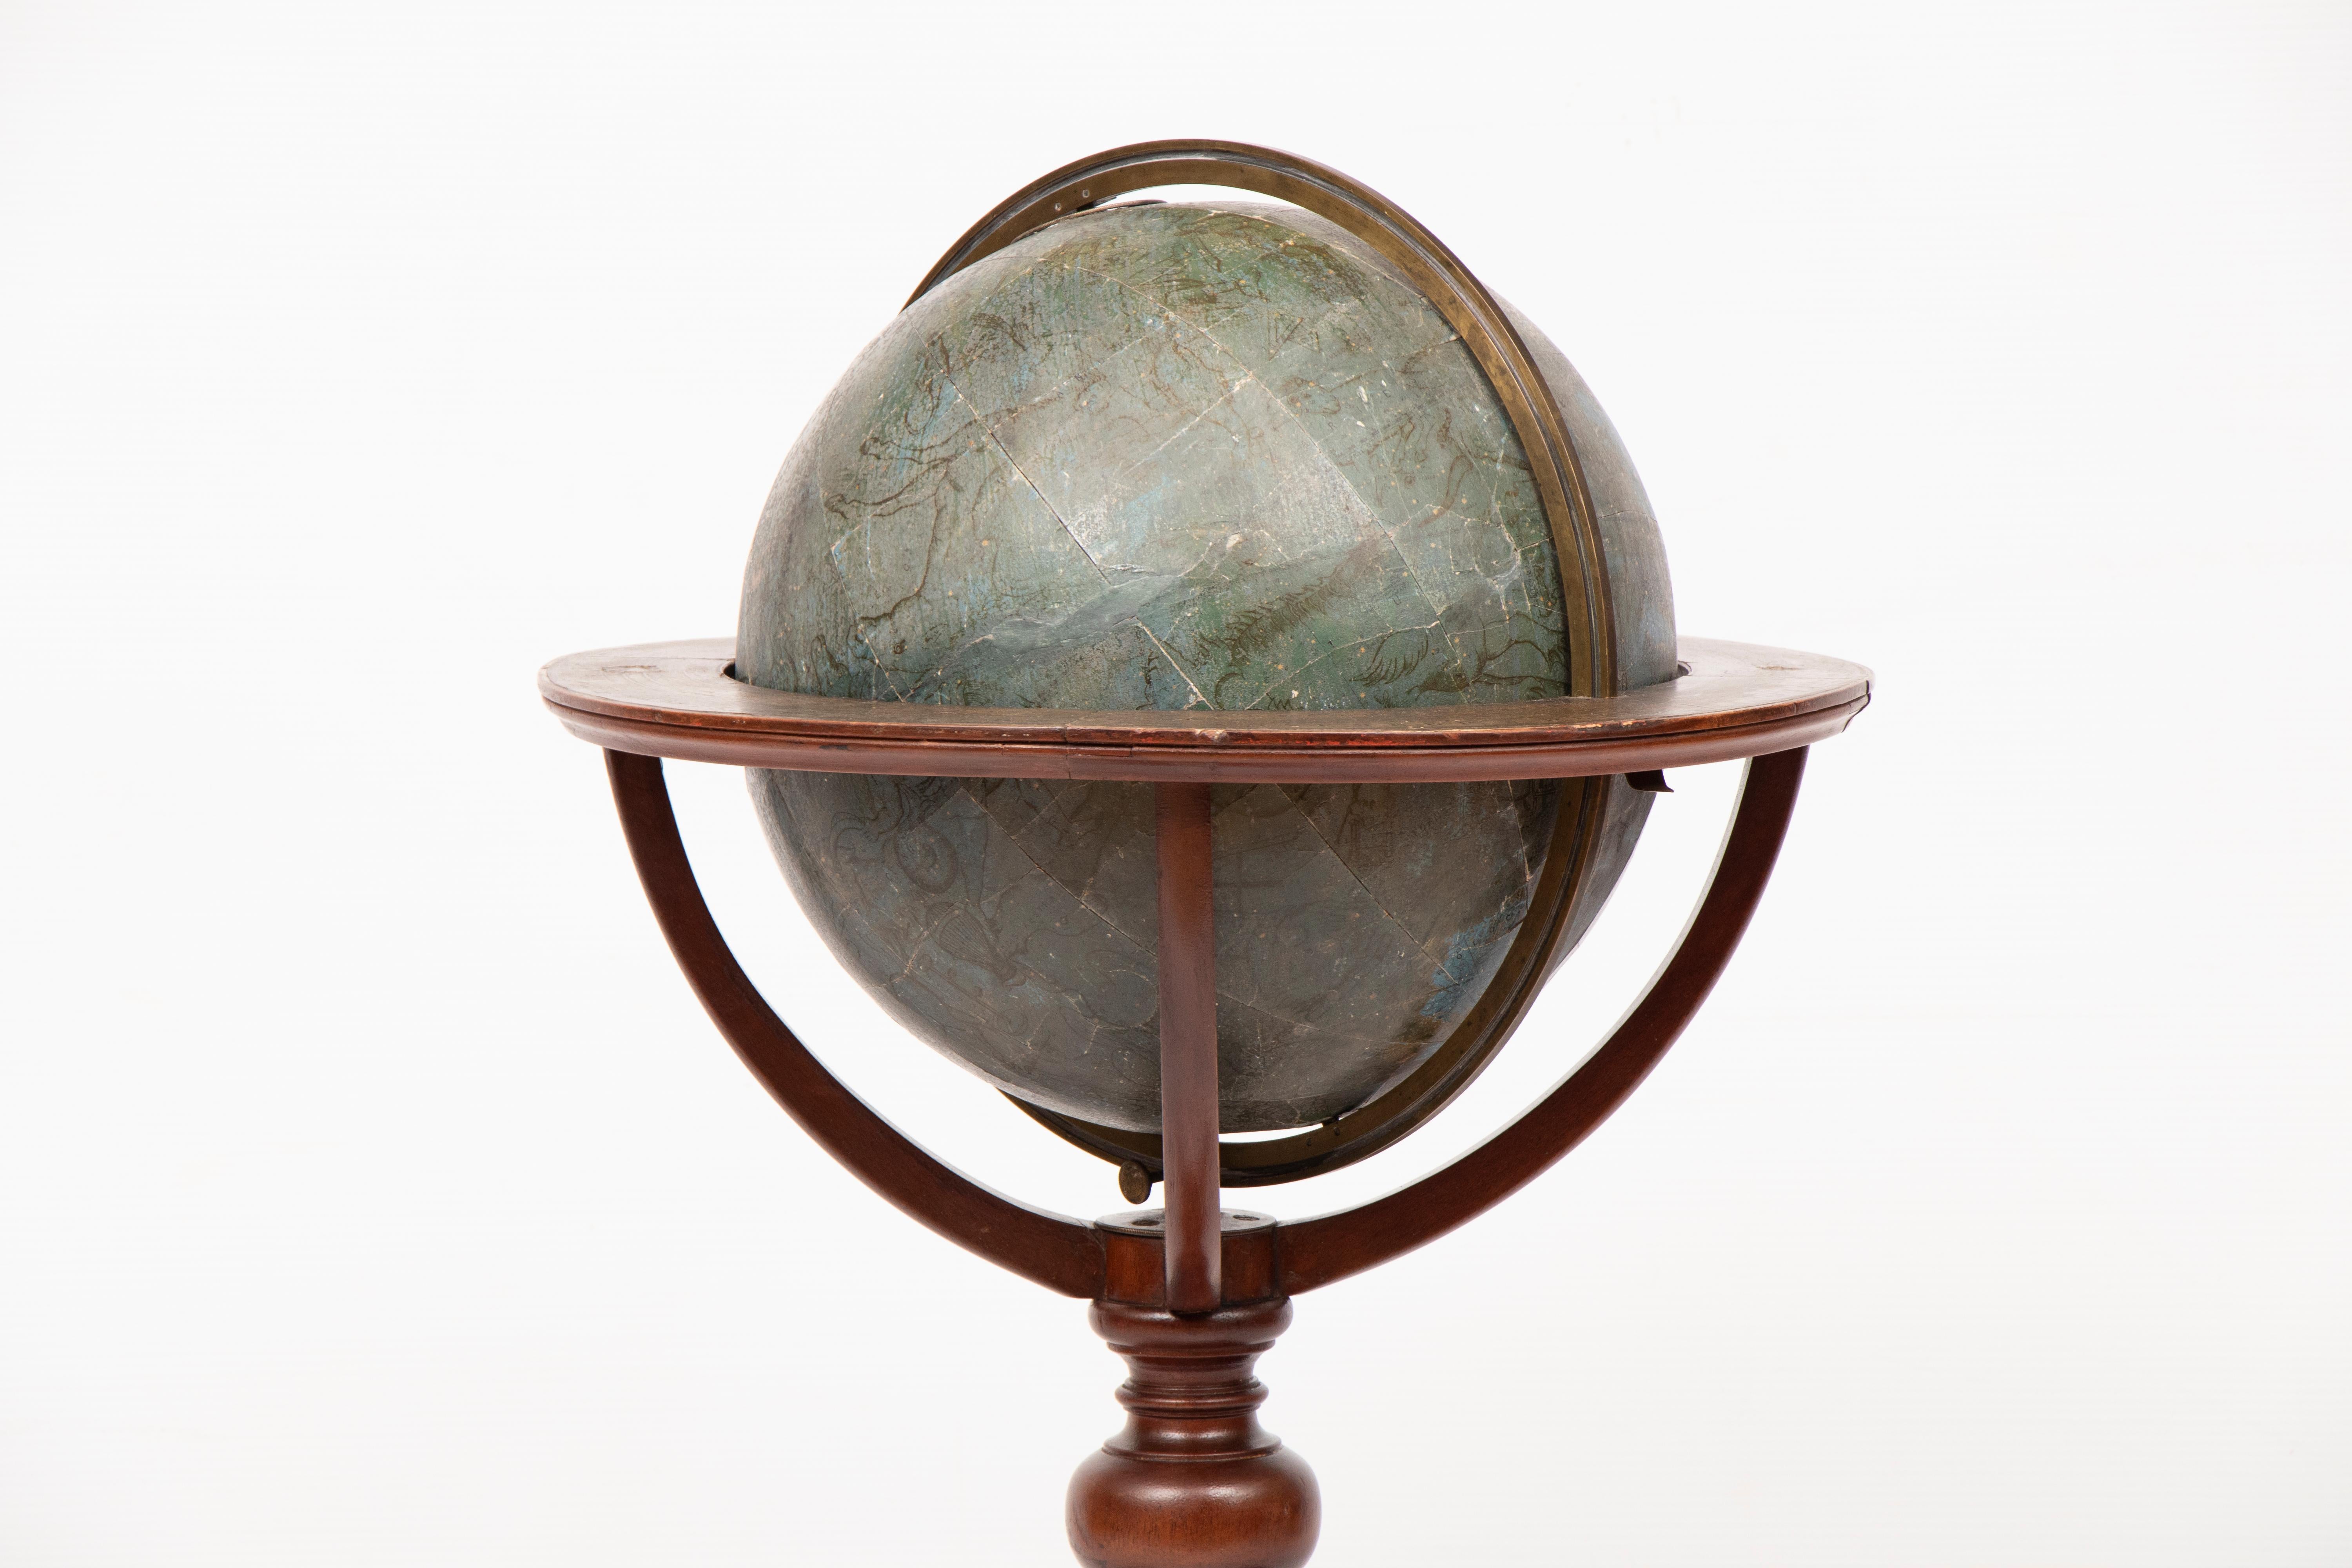 19th century celestial globe with compass on mahogany base by W & A K Johnston, Edinburgh.
This globe has had damage in the past and has been restored prior to us purchasing it, including having the mahogany frame been repolished.
 